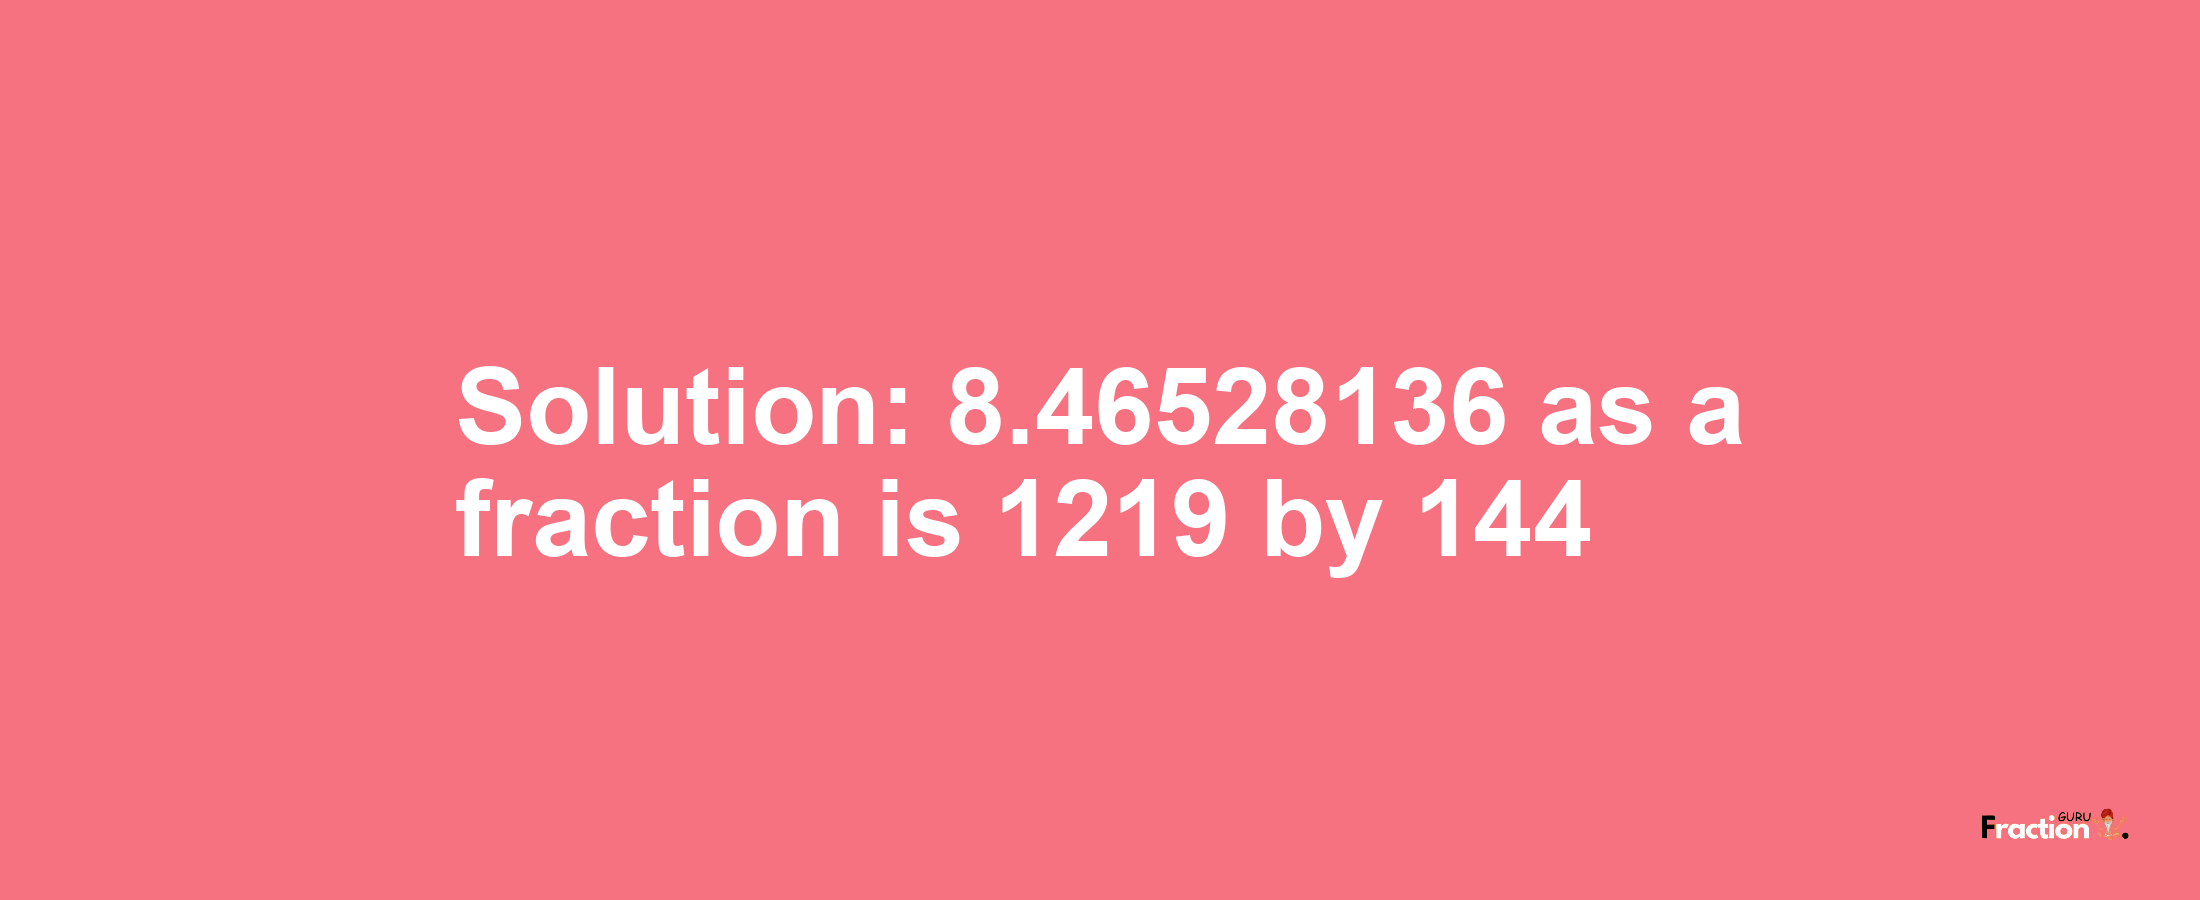 Solution:8.46528136 as a fraction is 1219/144